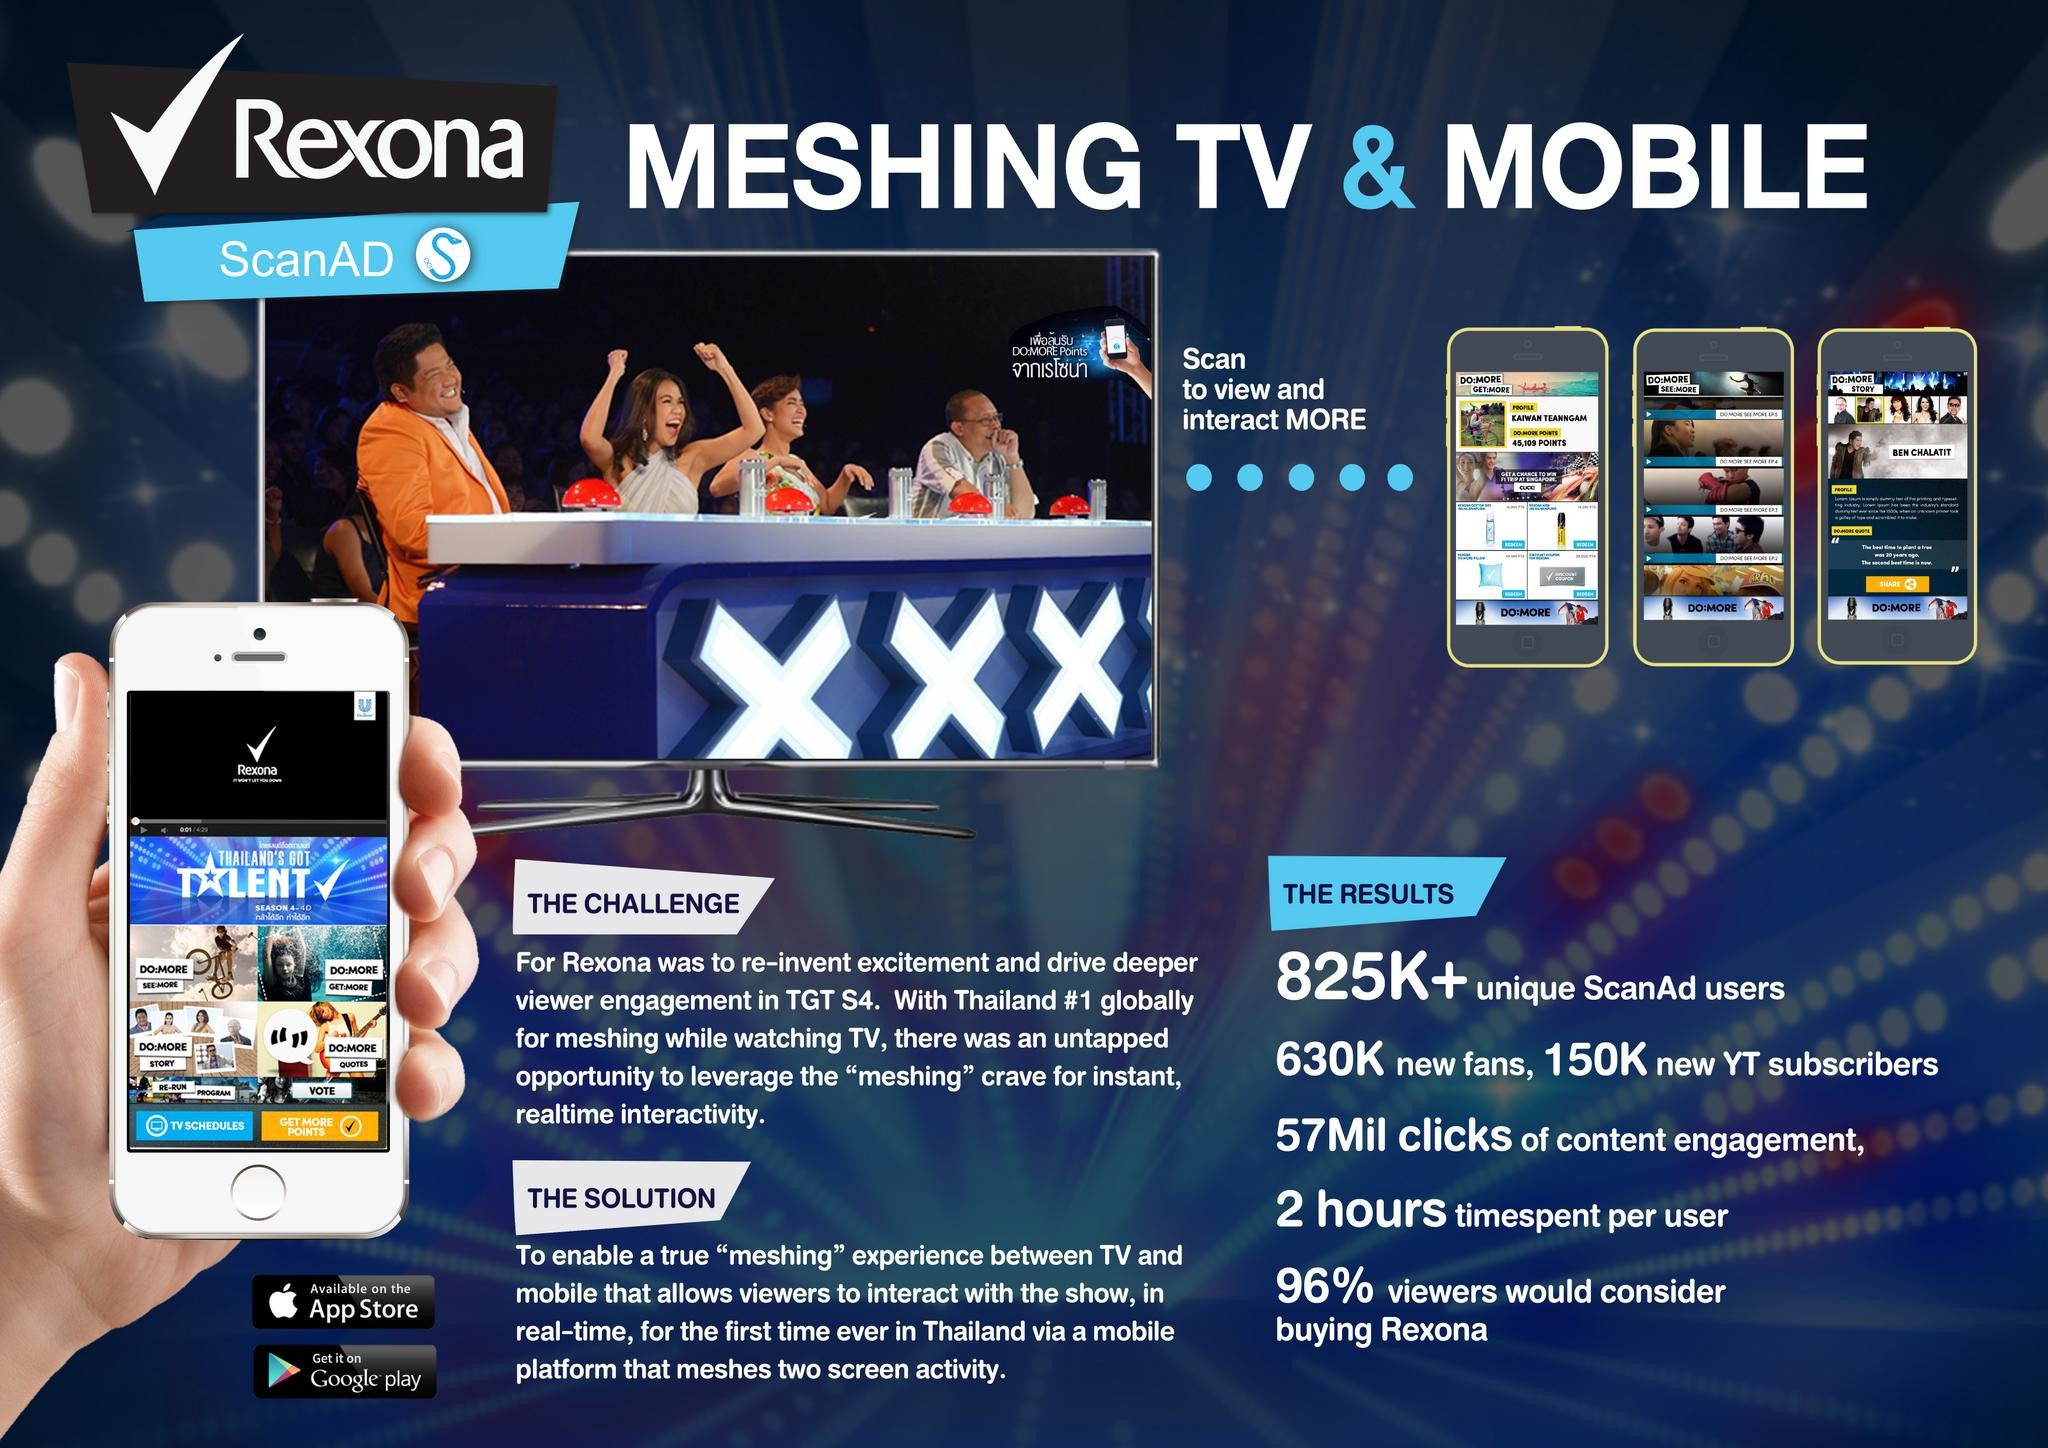 CREATING THE MESHING EXPERIENCE WITH TV TO MOBILE